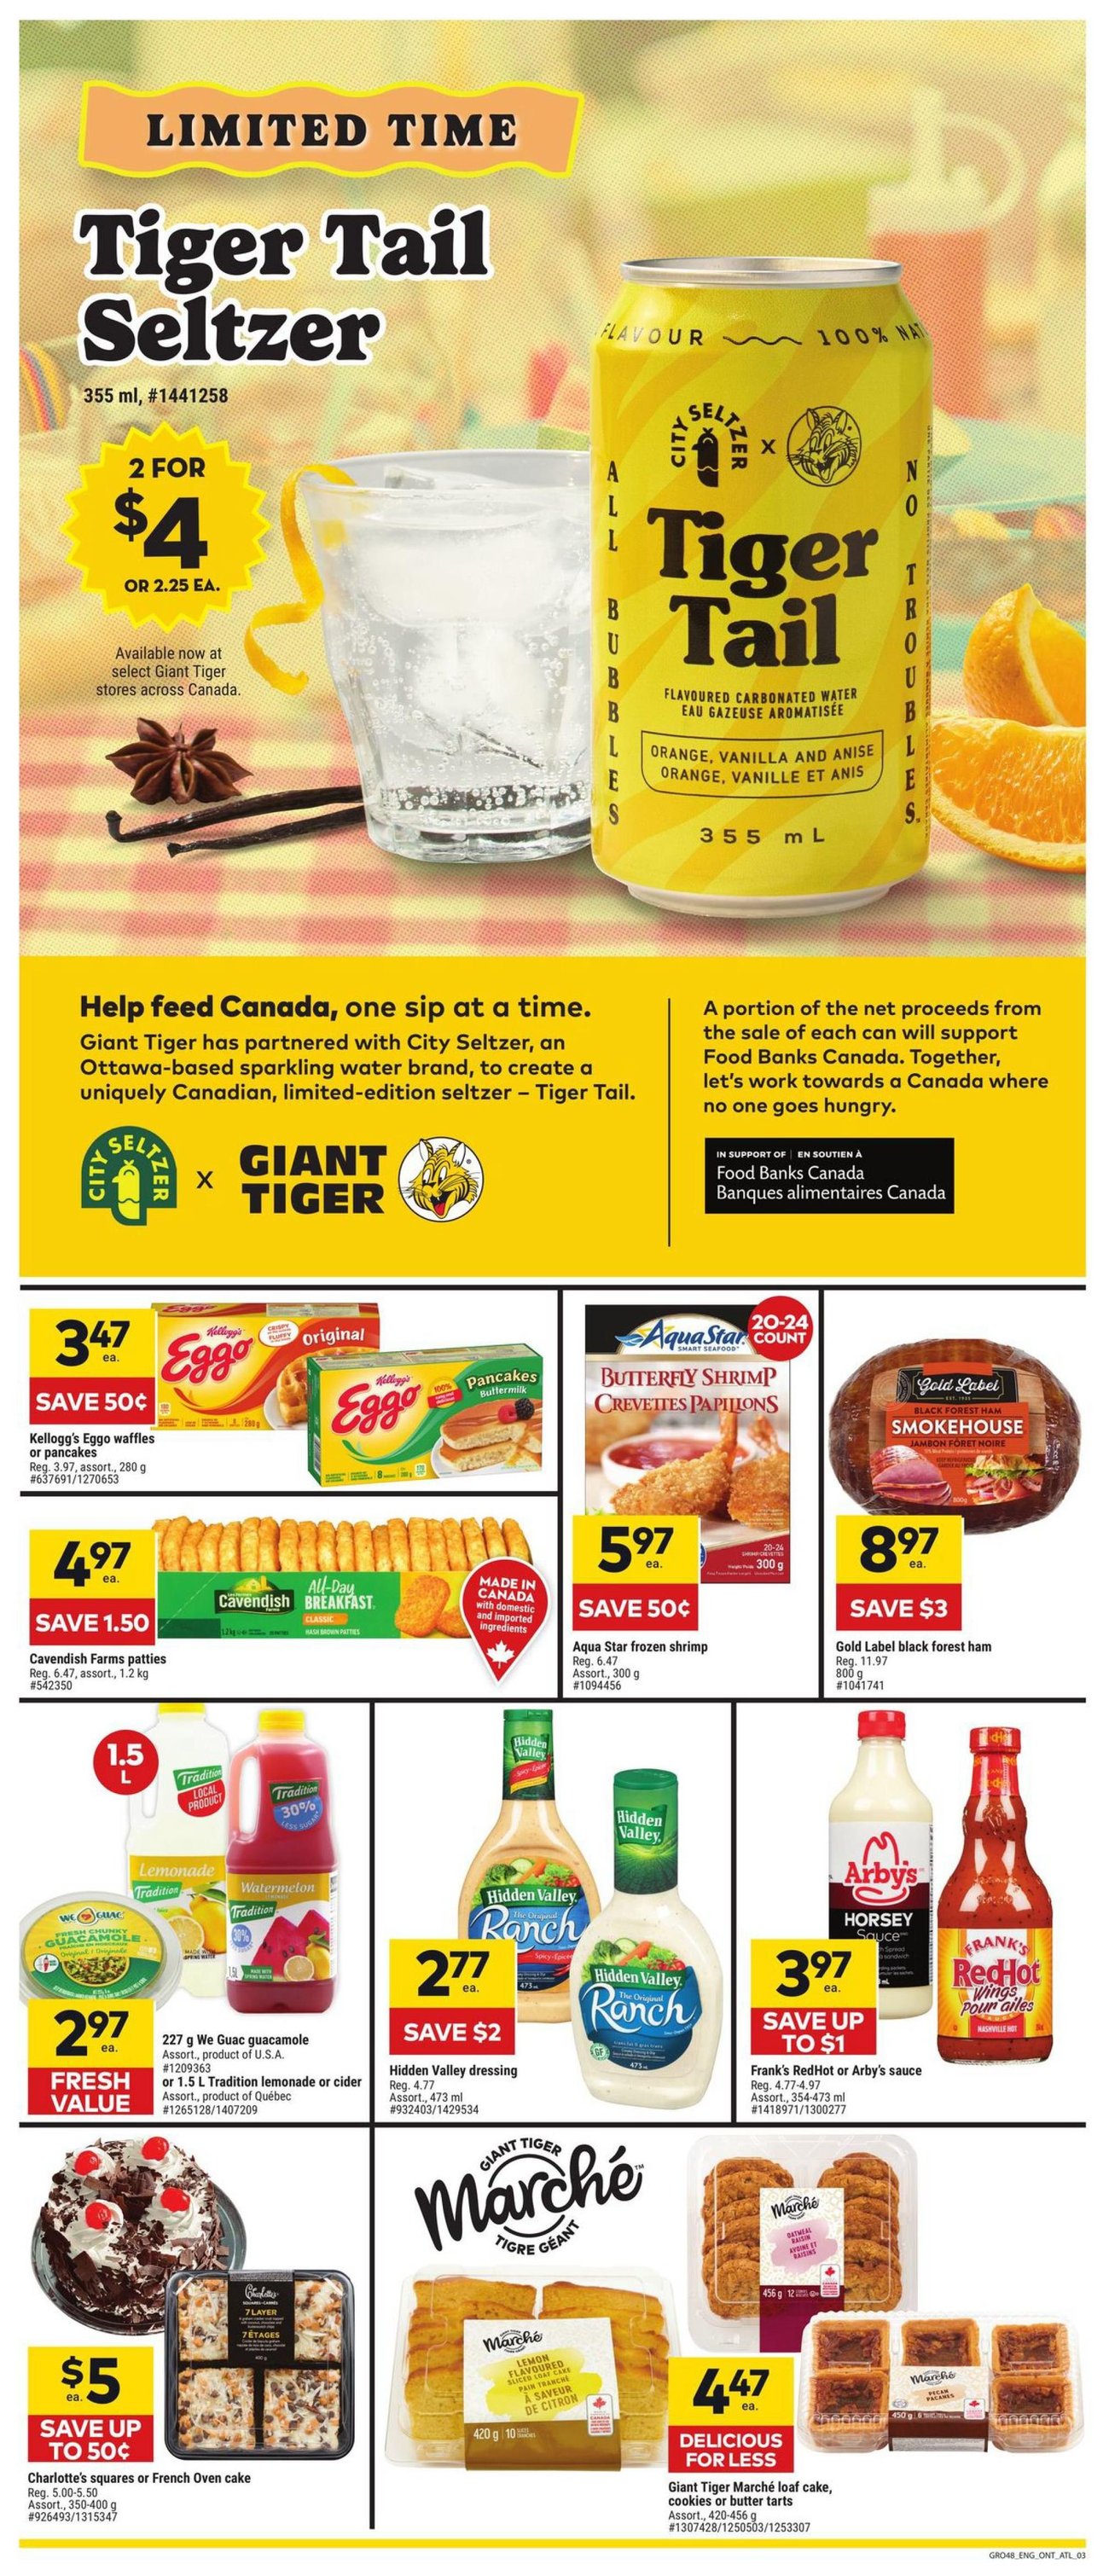 Giant Tiger - Ontario - Weekly Flyer Specials - Page 4